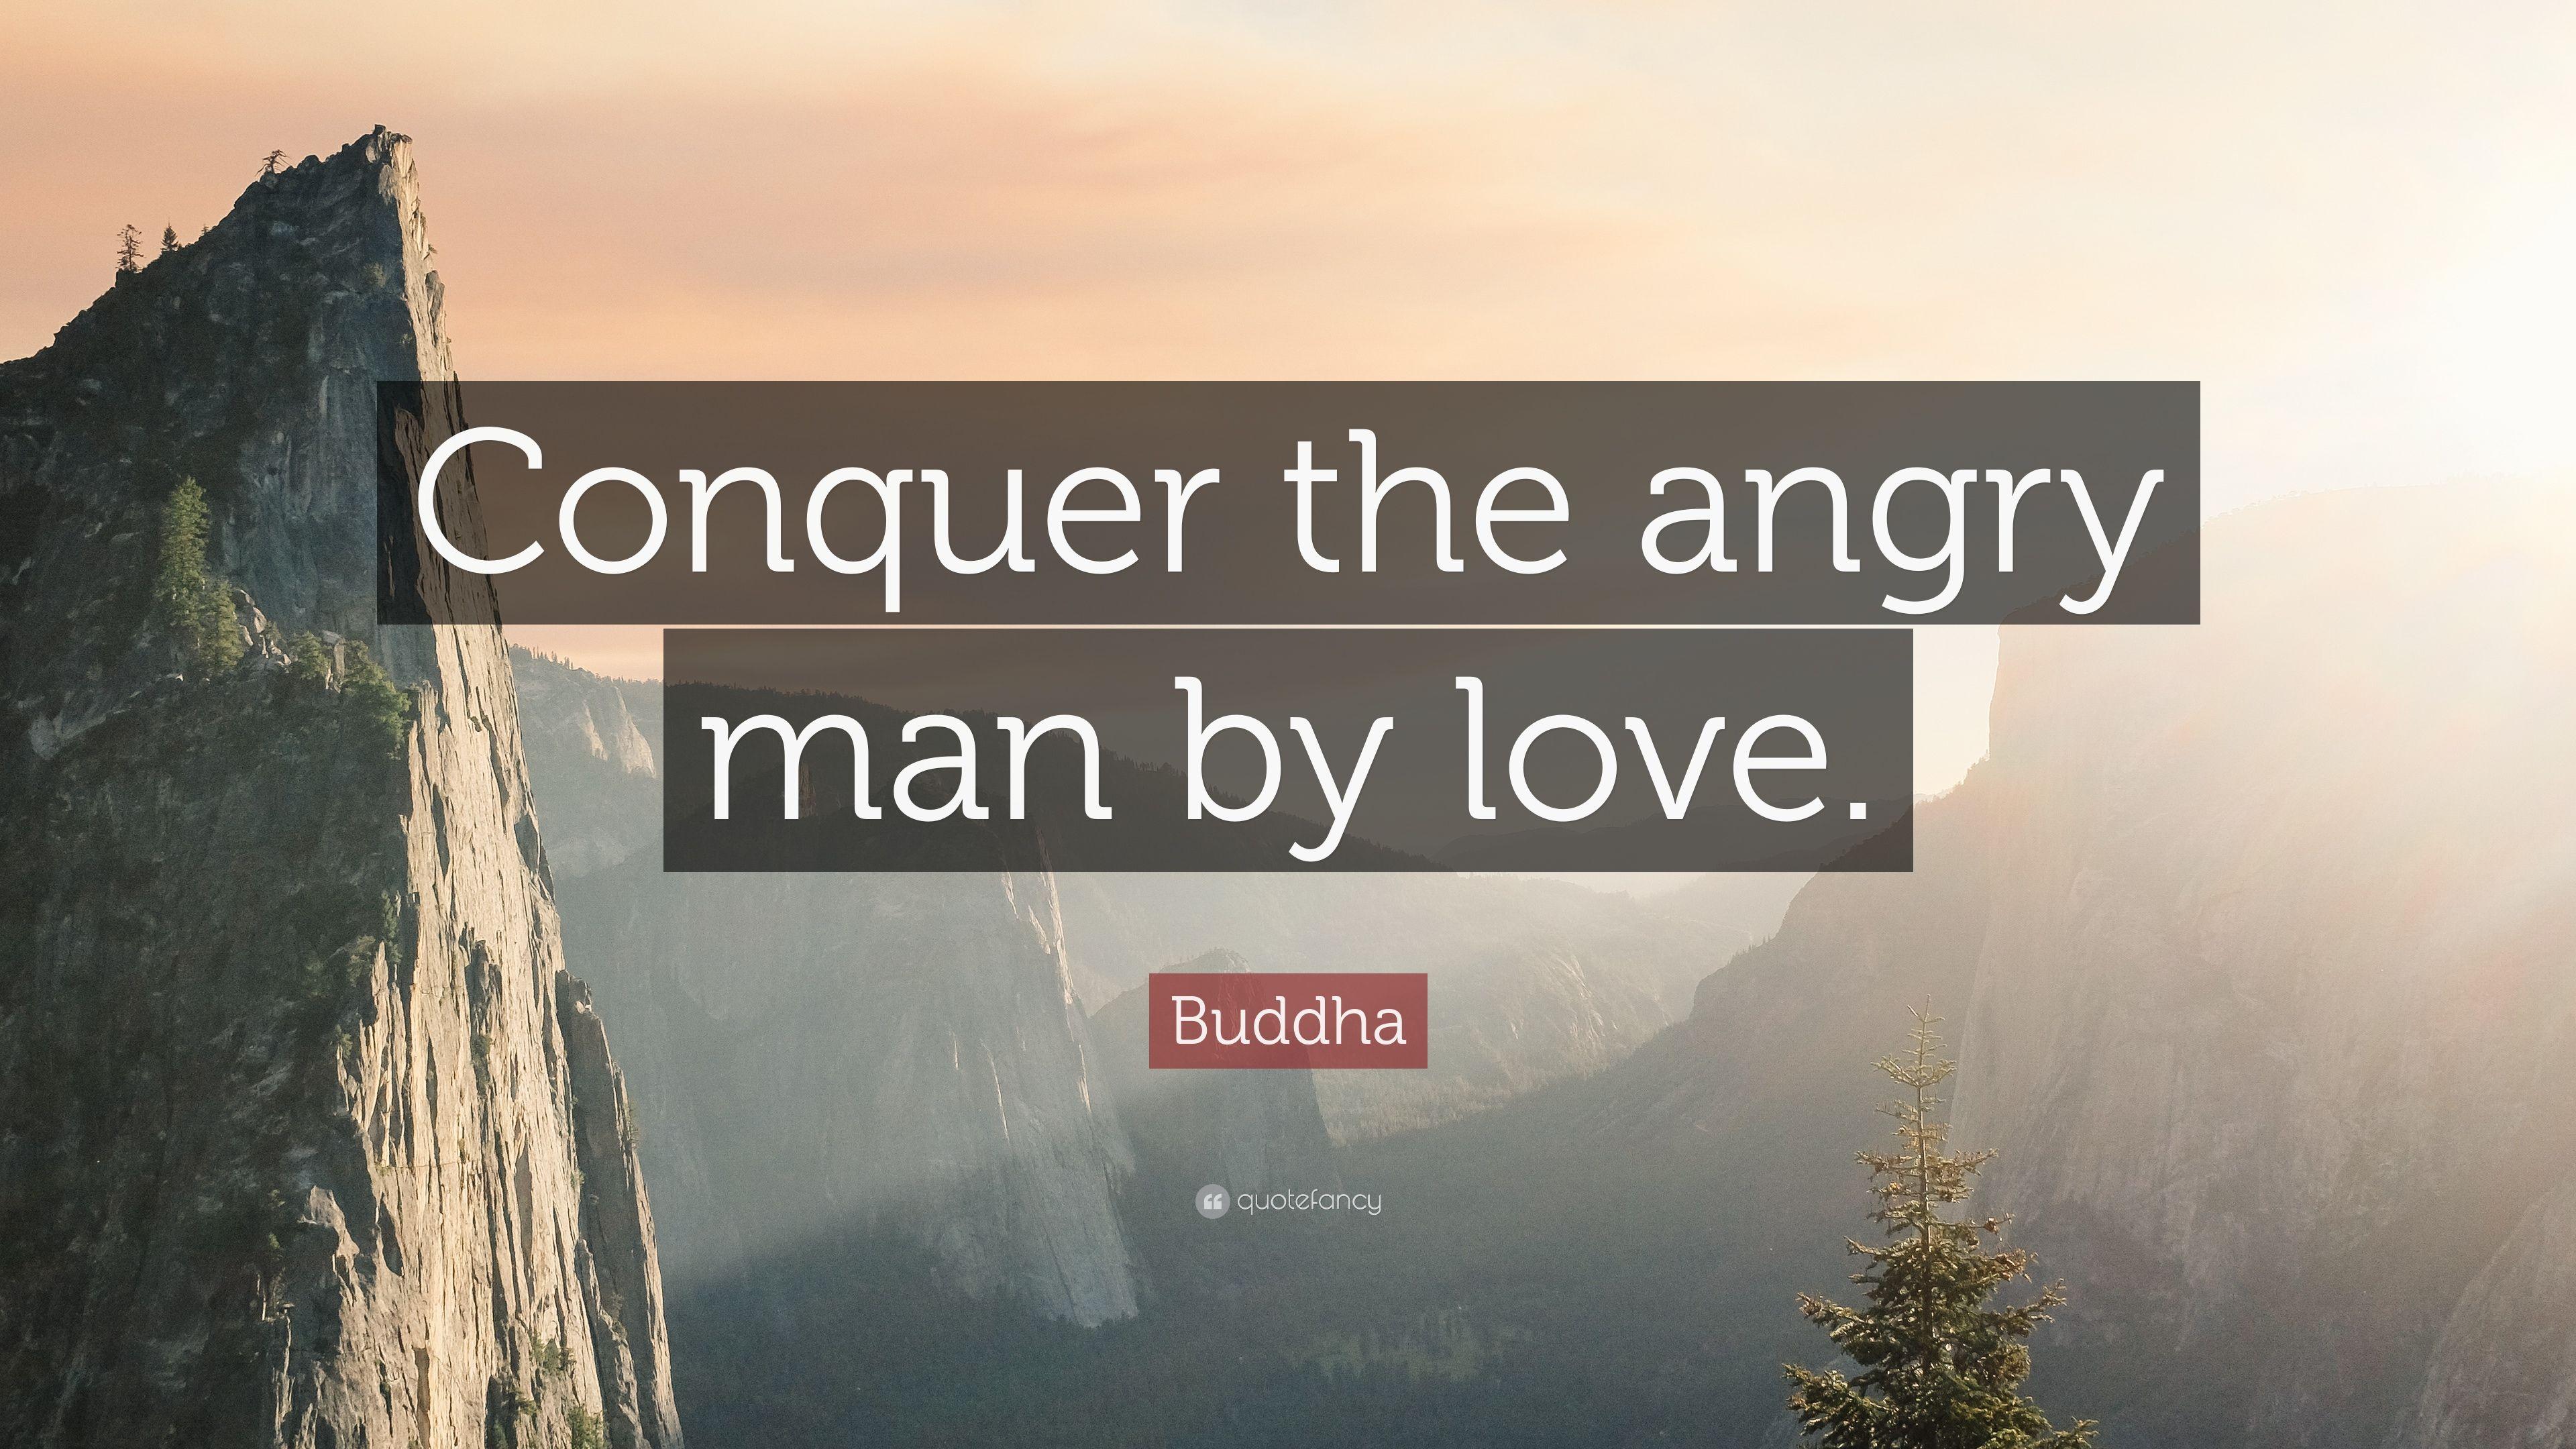 Buddha Quote: “Conquer the angry man by love.” 12 wallpaper